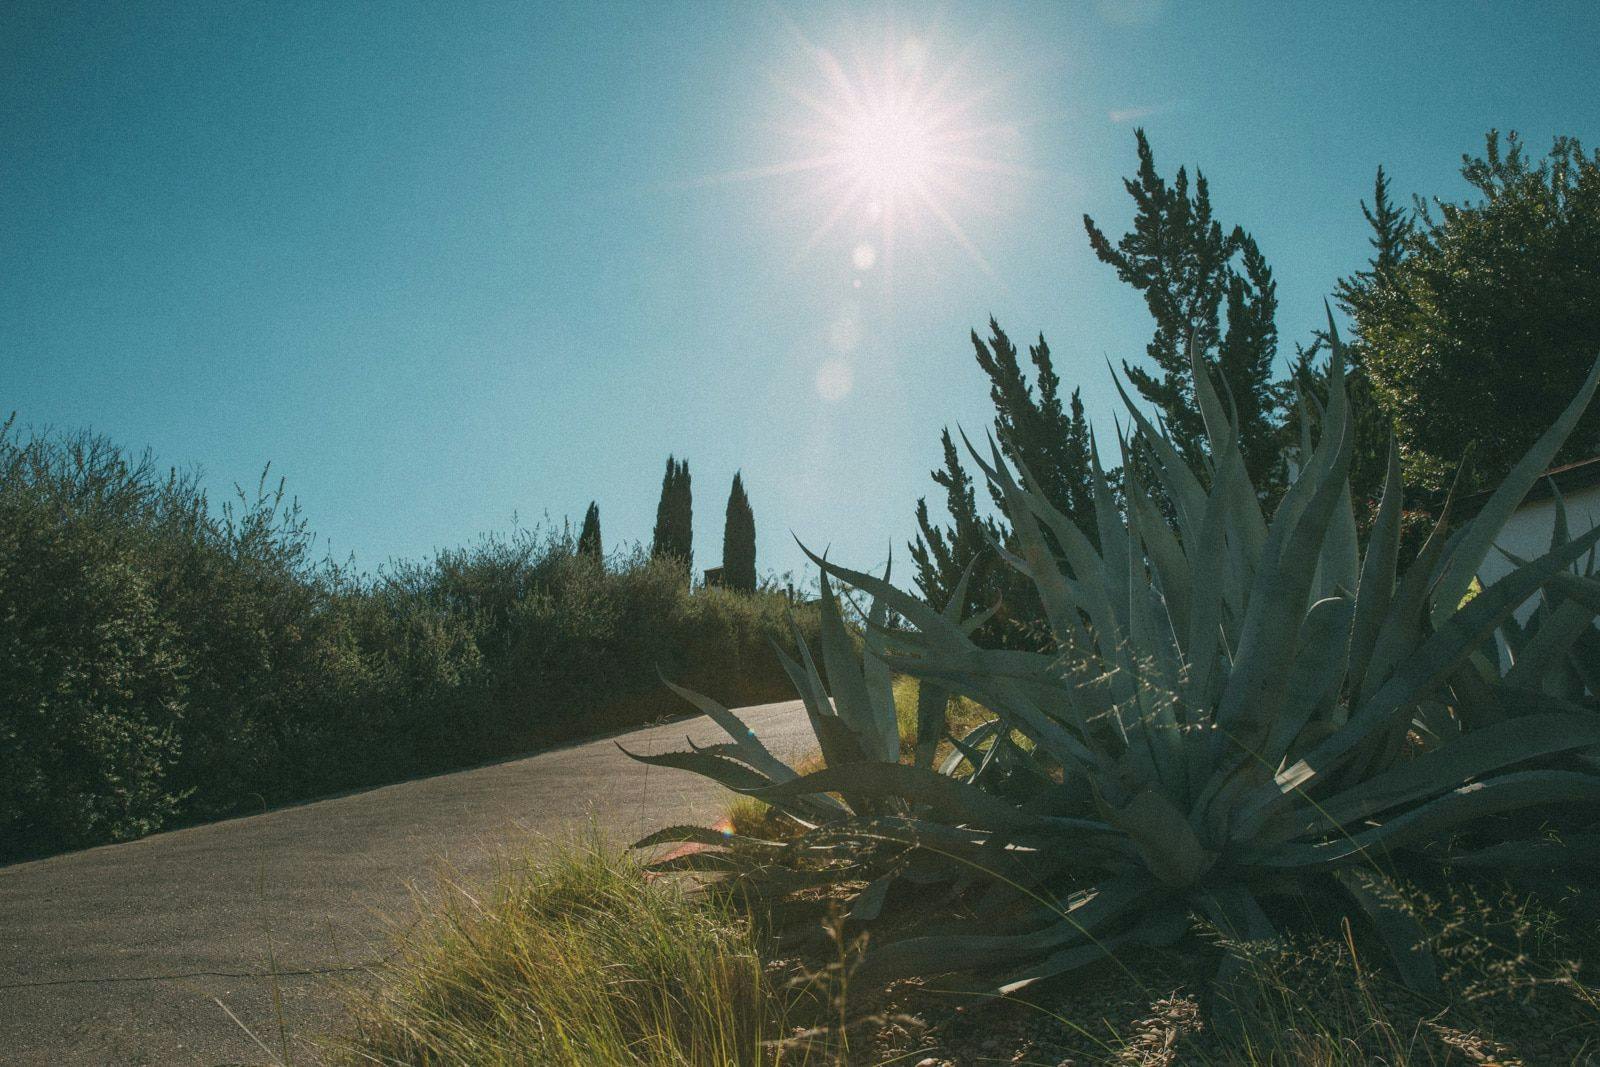 Sun beaming down on plants by a road